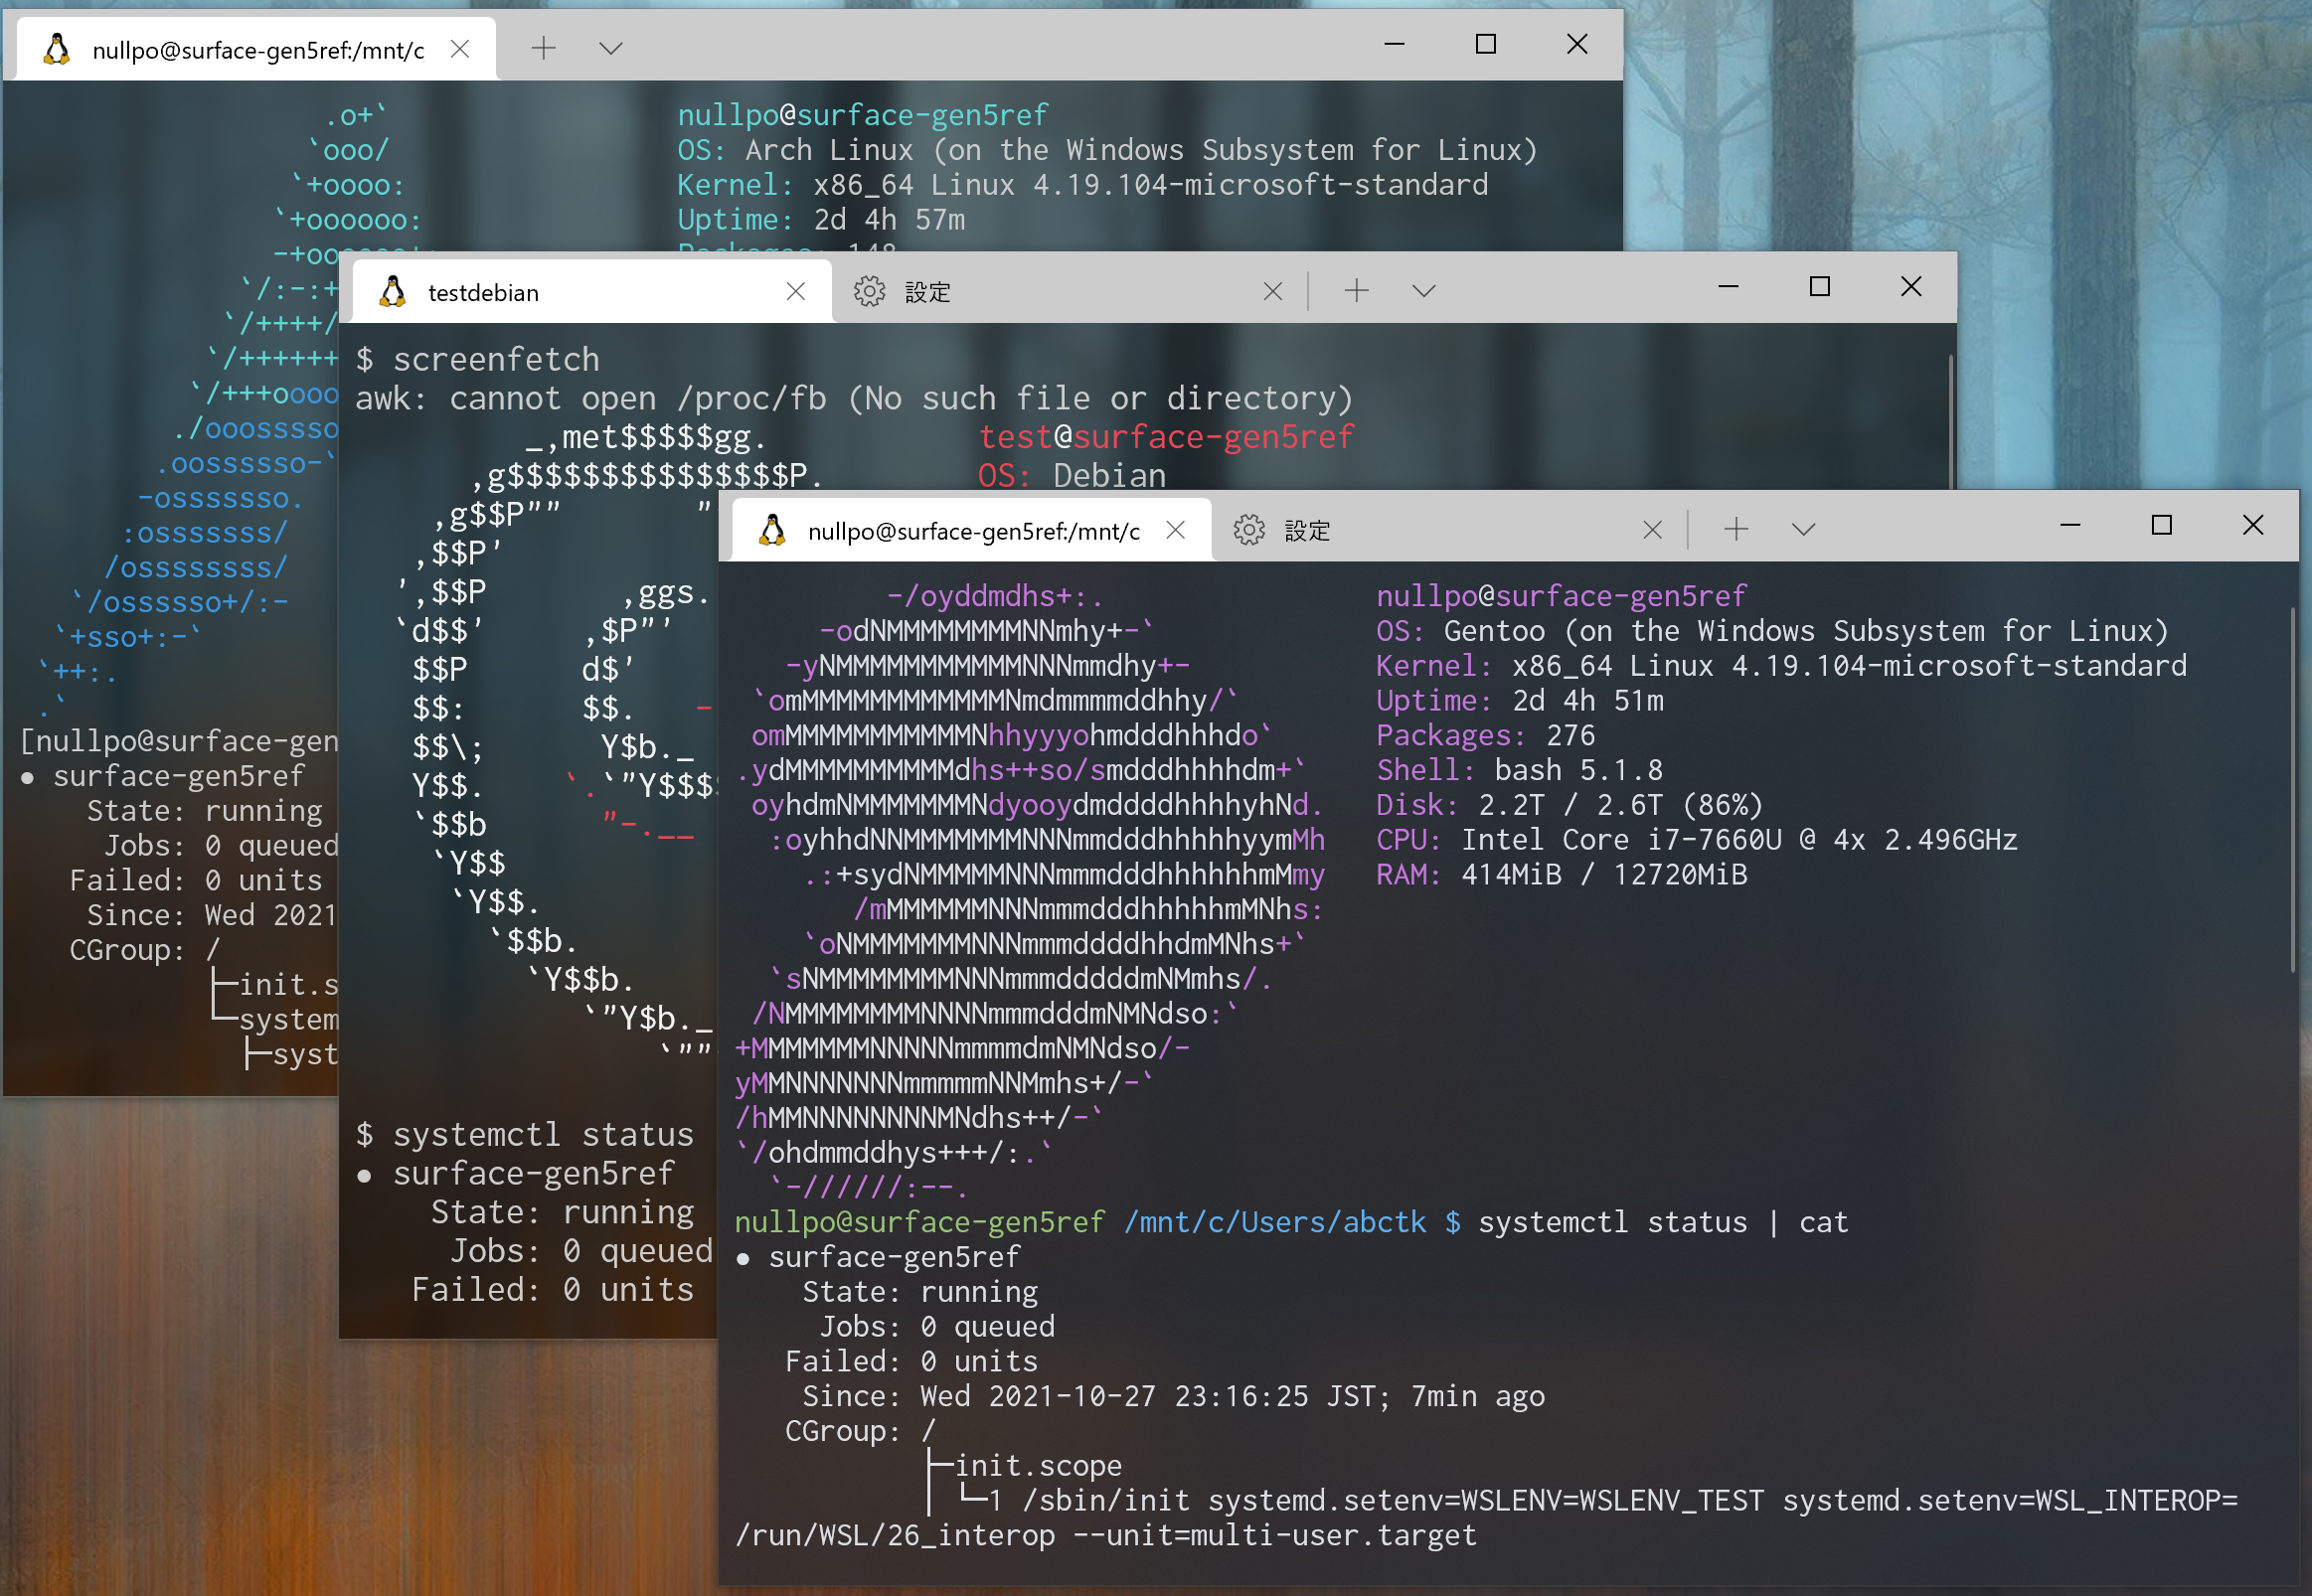 Arch, Debian, and Gentoo are running on WSL 2 with systemd running